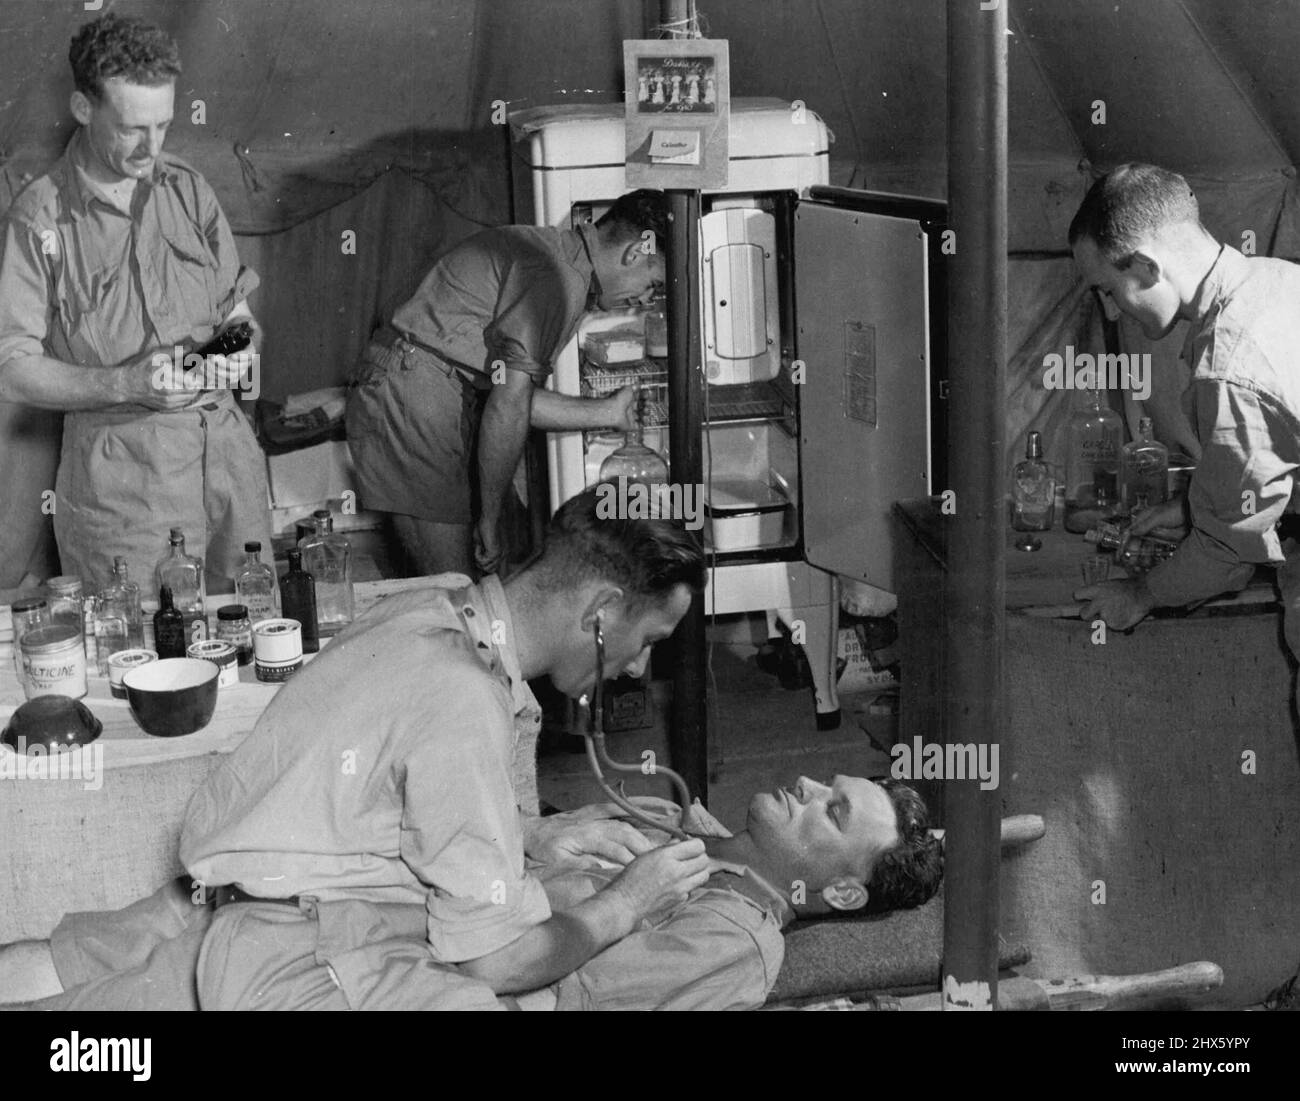 The A.A. M.C. is noted for its splendid equipment and its personnel. Captain N.R. Godby making a diagnosis at one of the field hospitals. July 26, 1940. (Photo by Commonwealth Department Of Information).;The A.A. M.C. is noted for its splendid equipment and its personnel. Captain N.R. Godby making a diagnosis at one of the field hospitals. Stock Photo